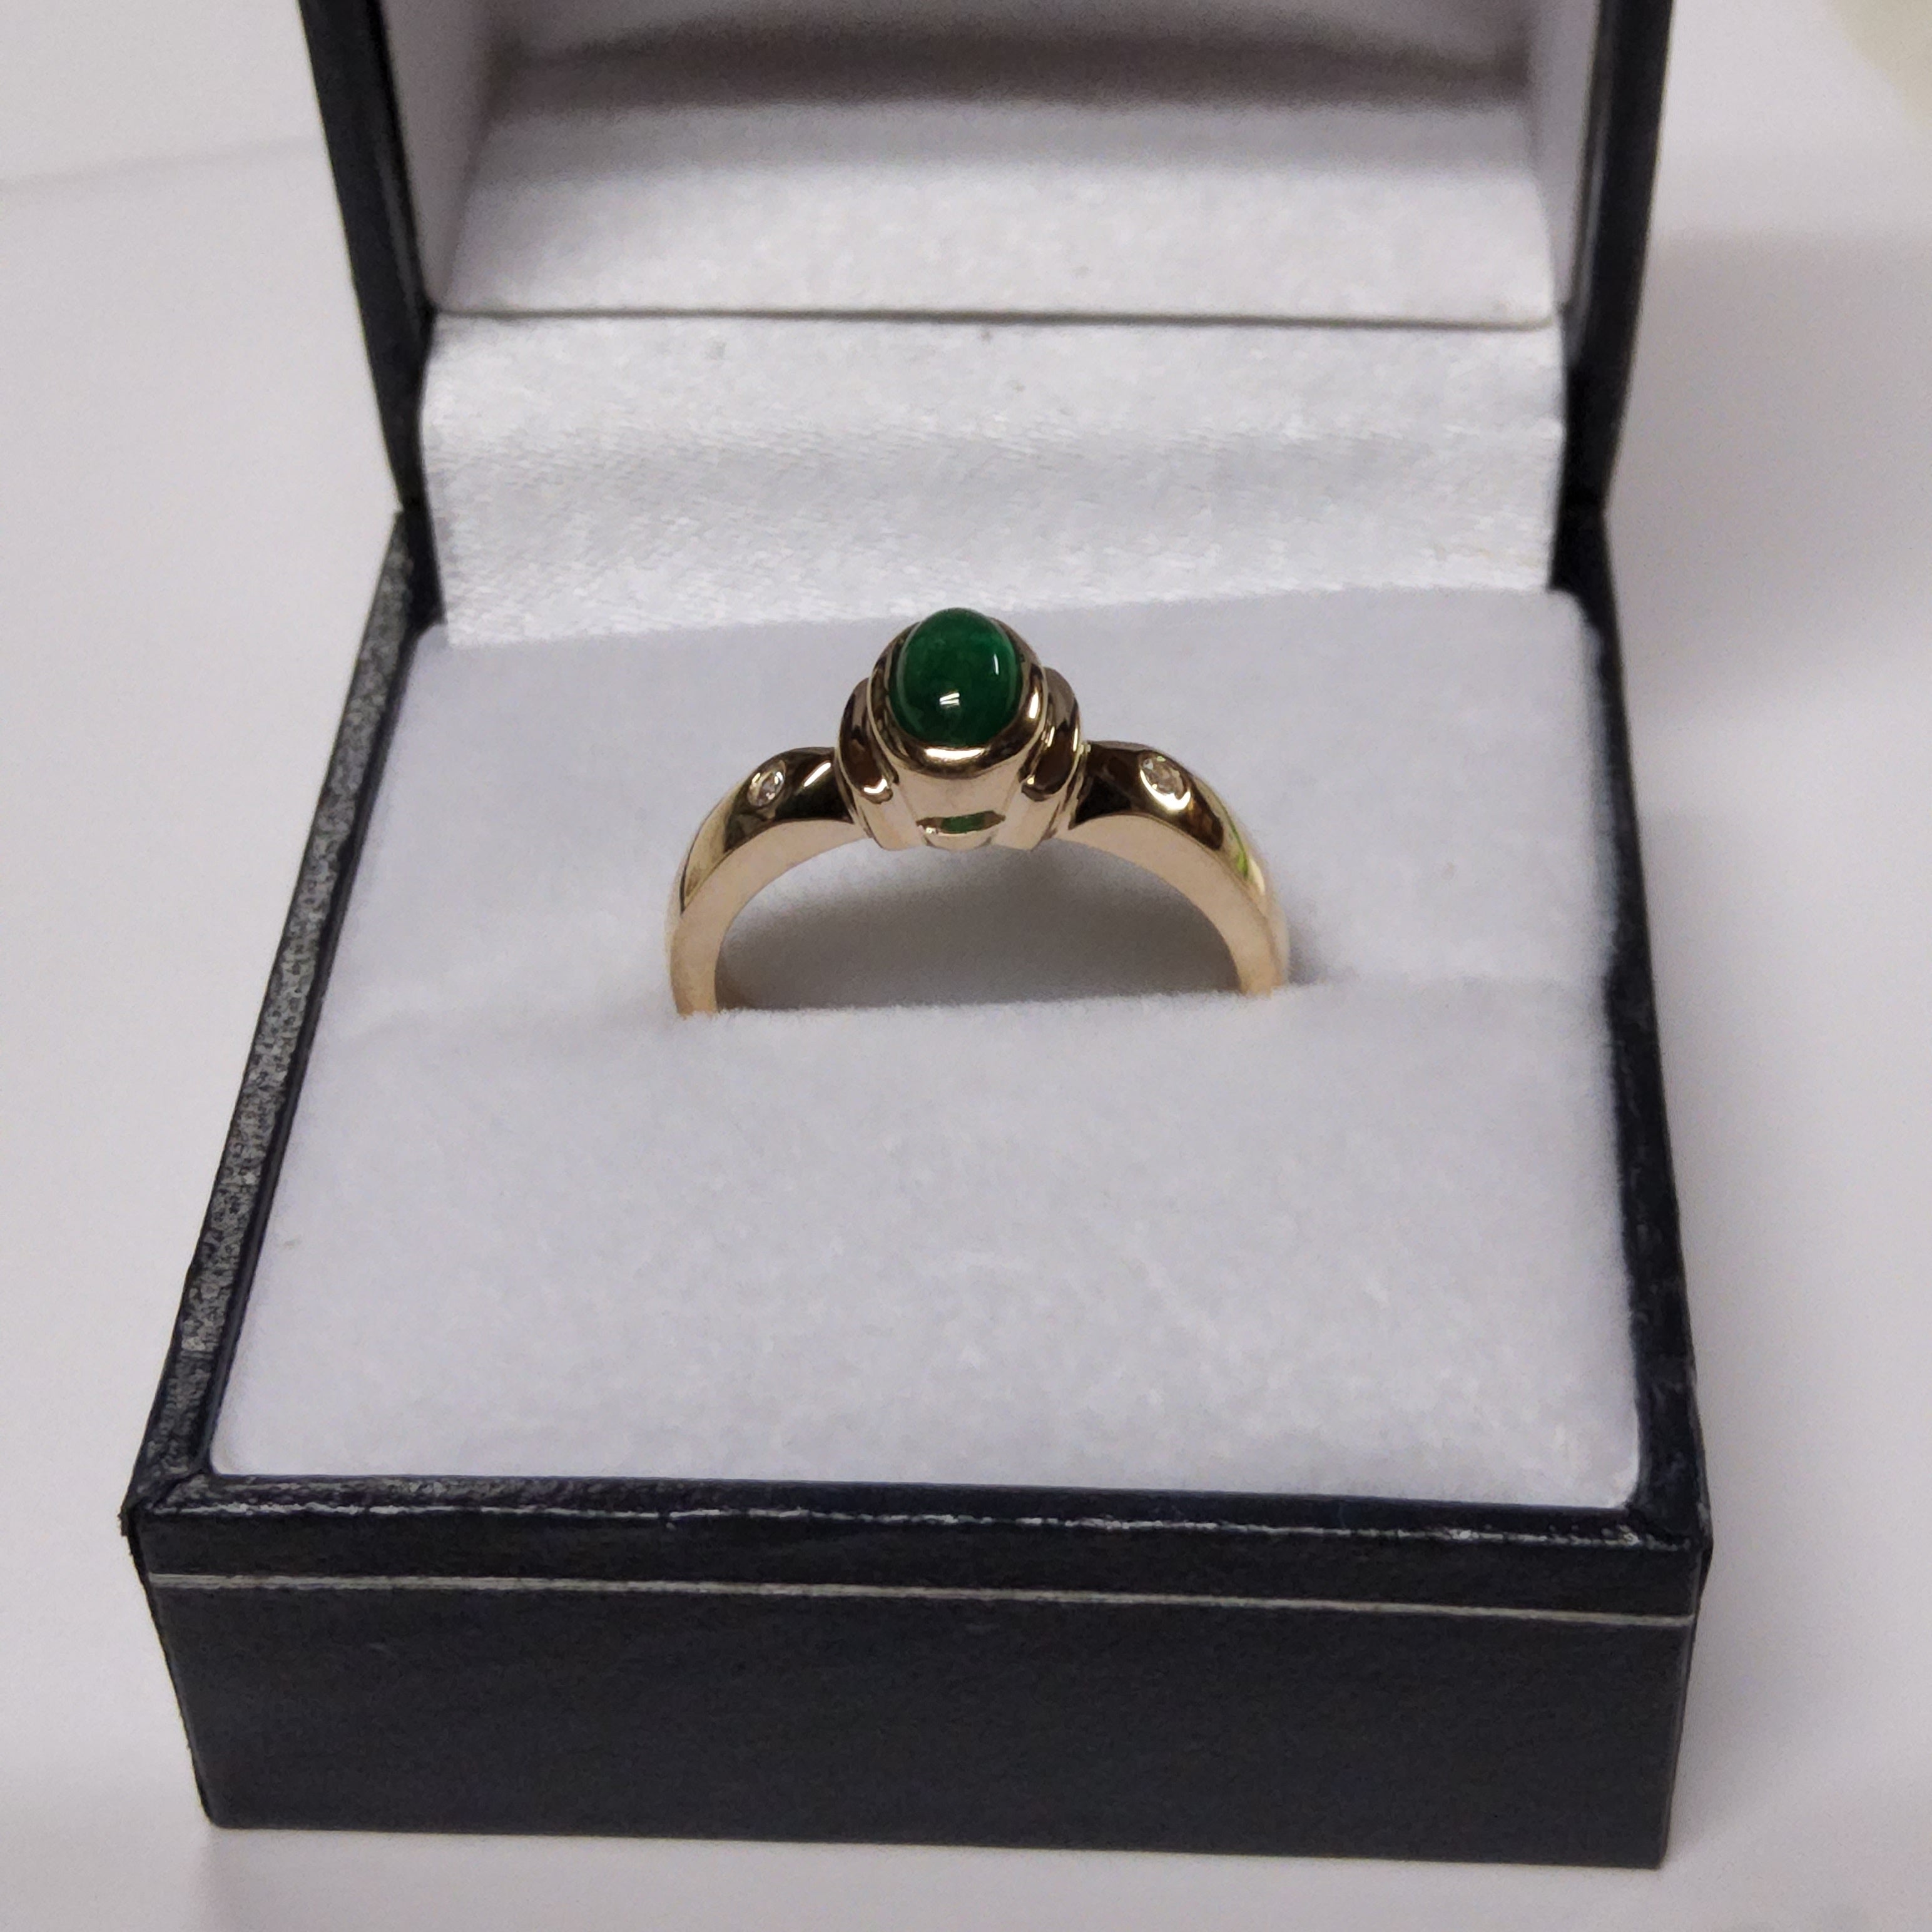 Cabochon Cut Emerald Ring with Diamonds